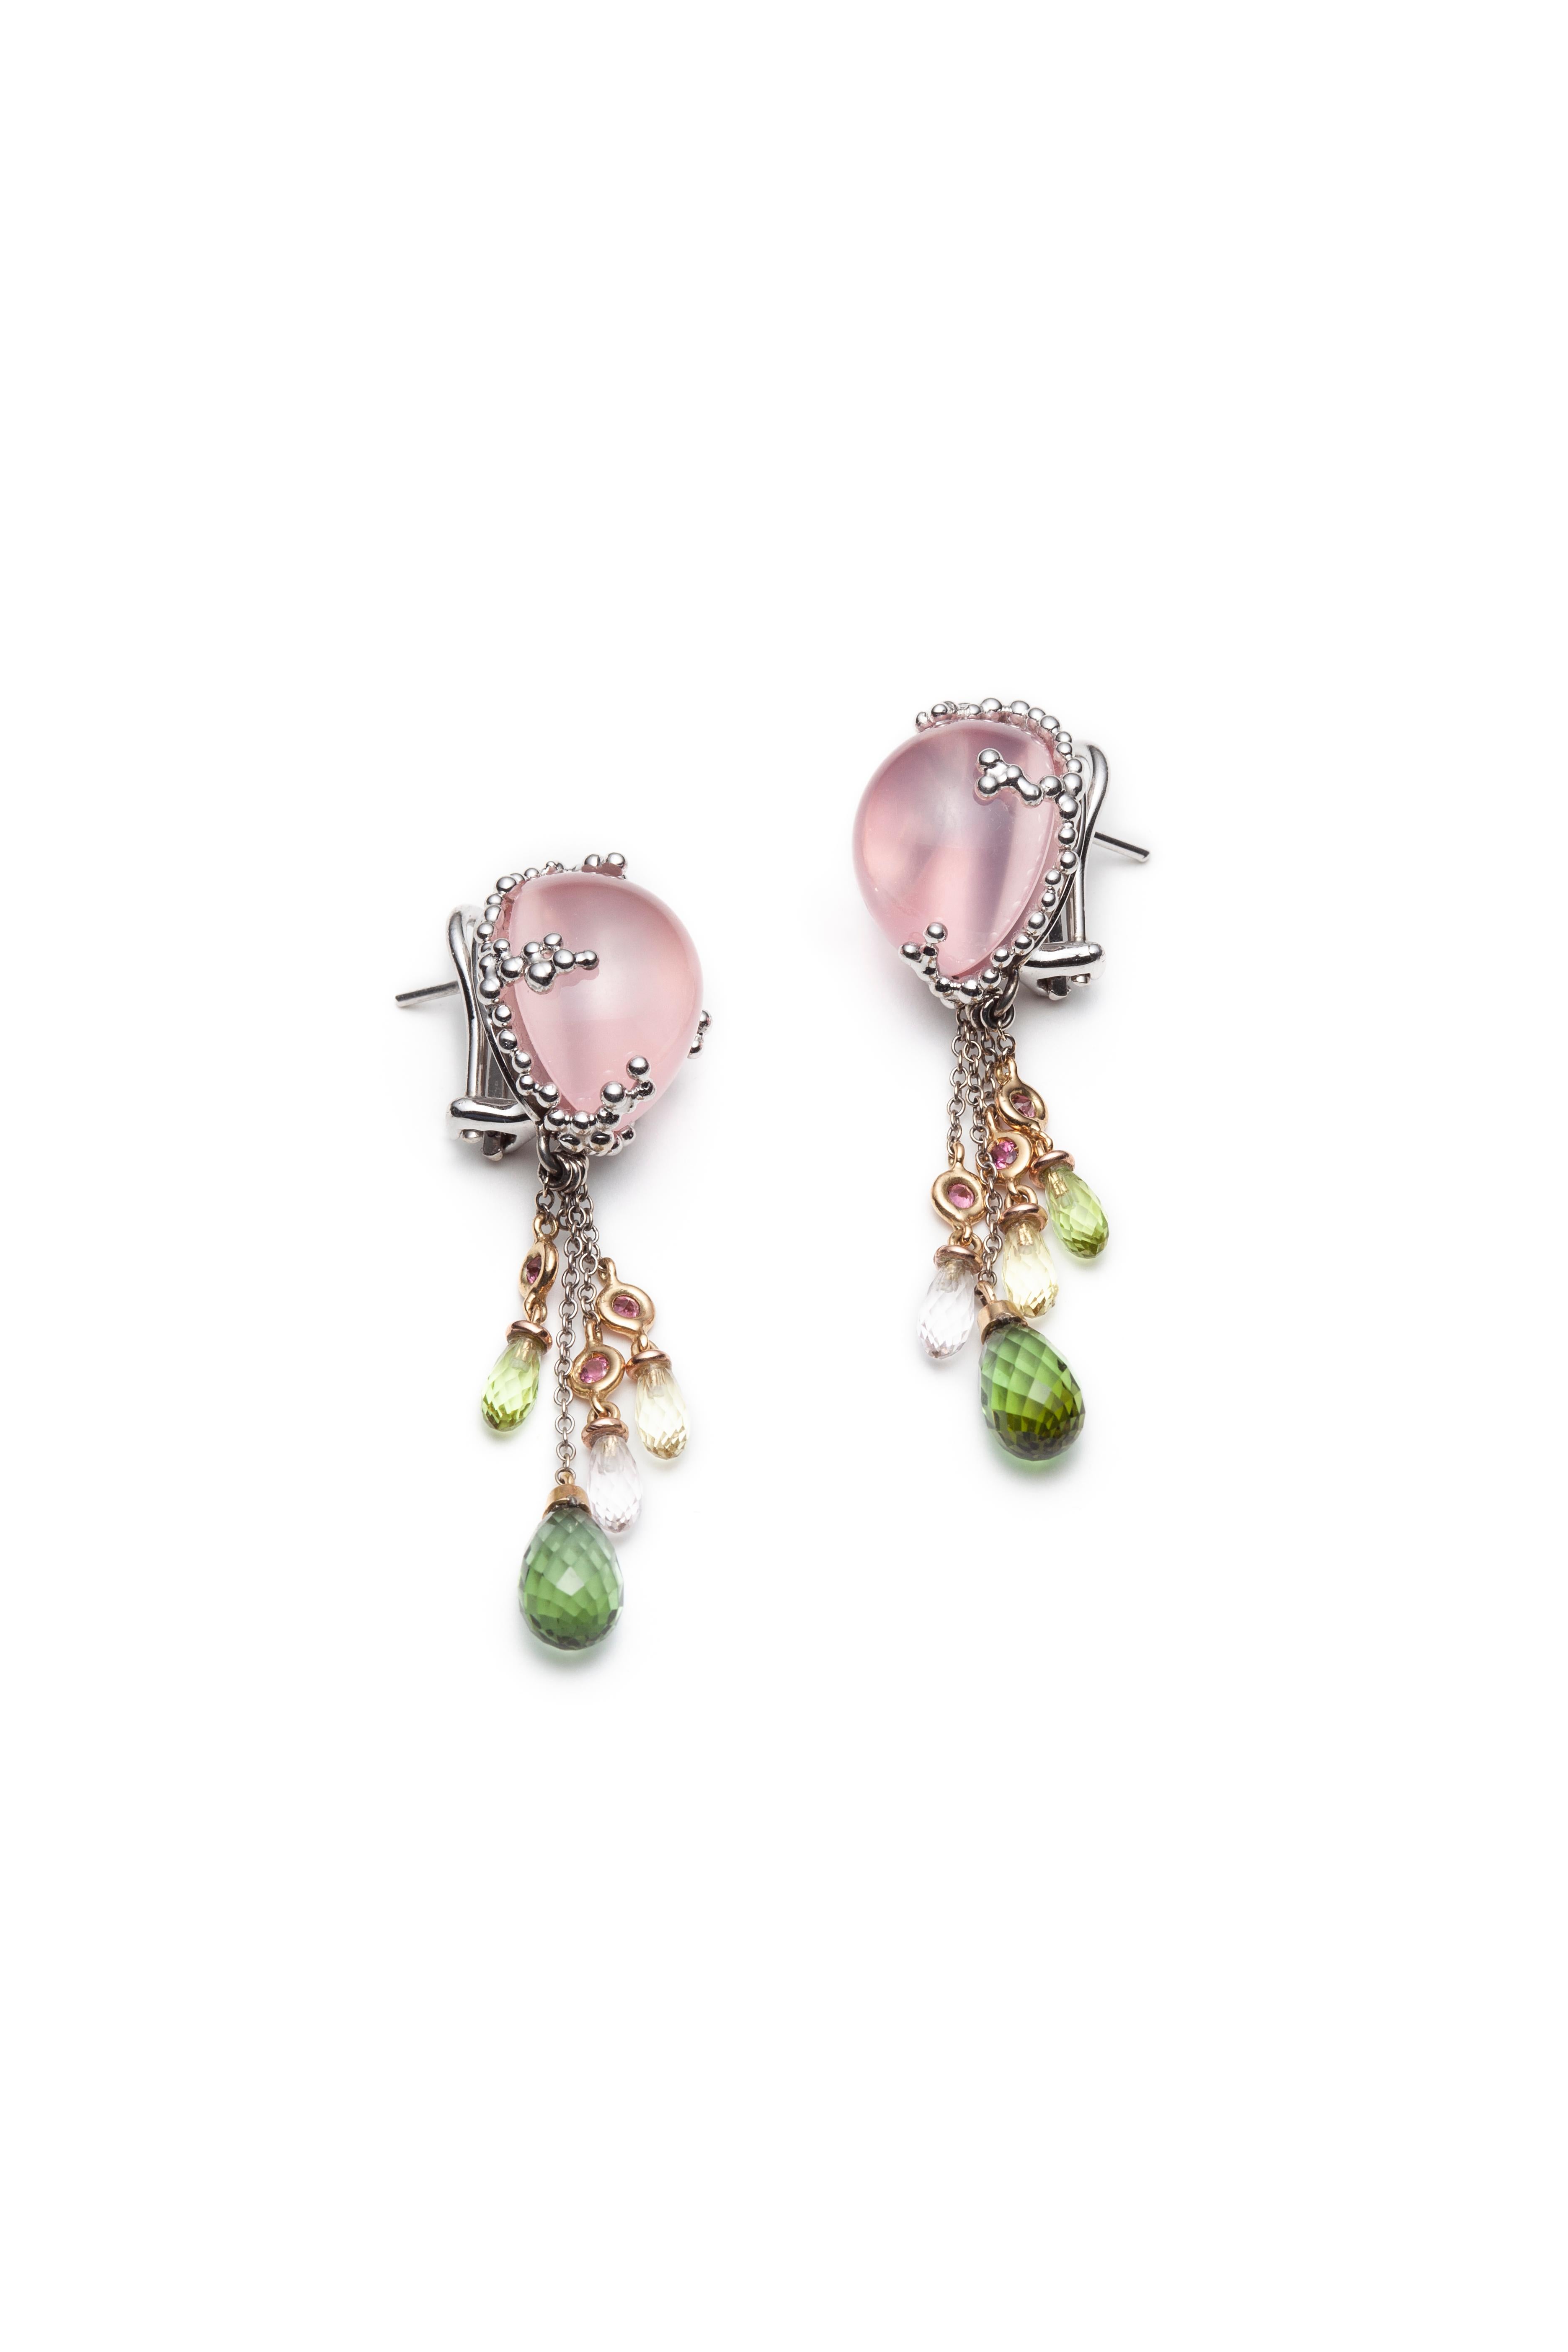 
The PRIMAVERA rose quartz earrings are made in 18k white, pink and yellow gold. The main stones, rose quartz cabochons are held in place by settings made of tiny white gold balls. Prasiolite quartz, peridot and tourmaline briolettes mounted with